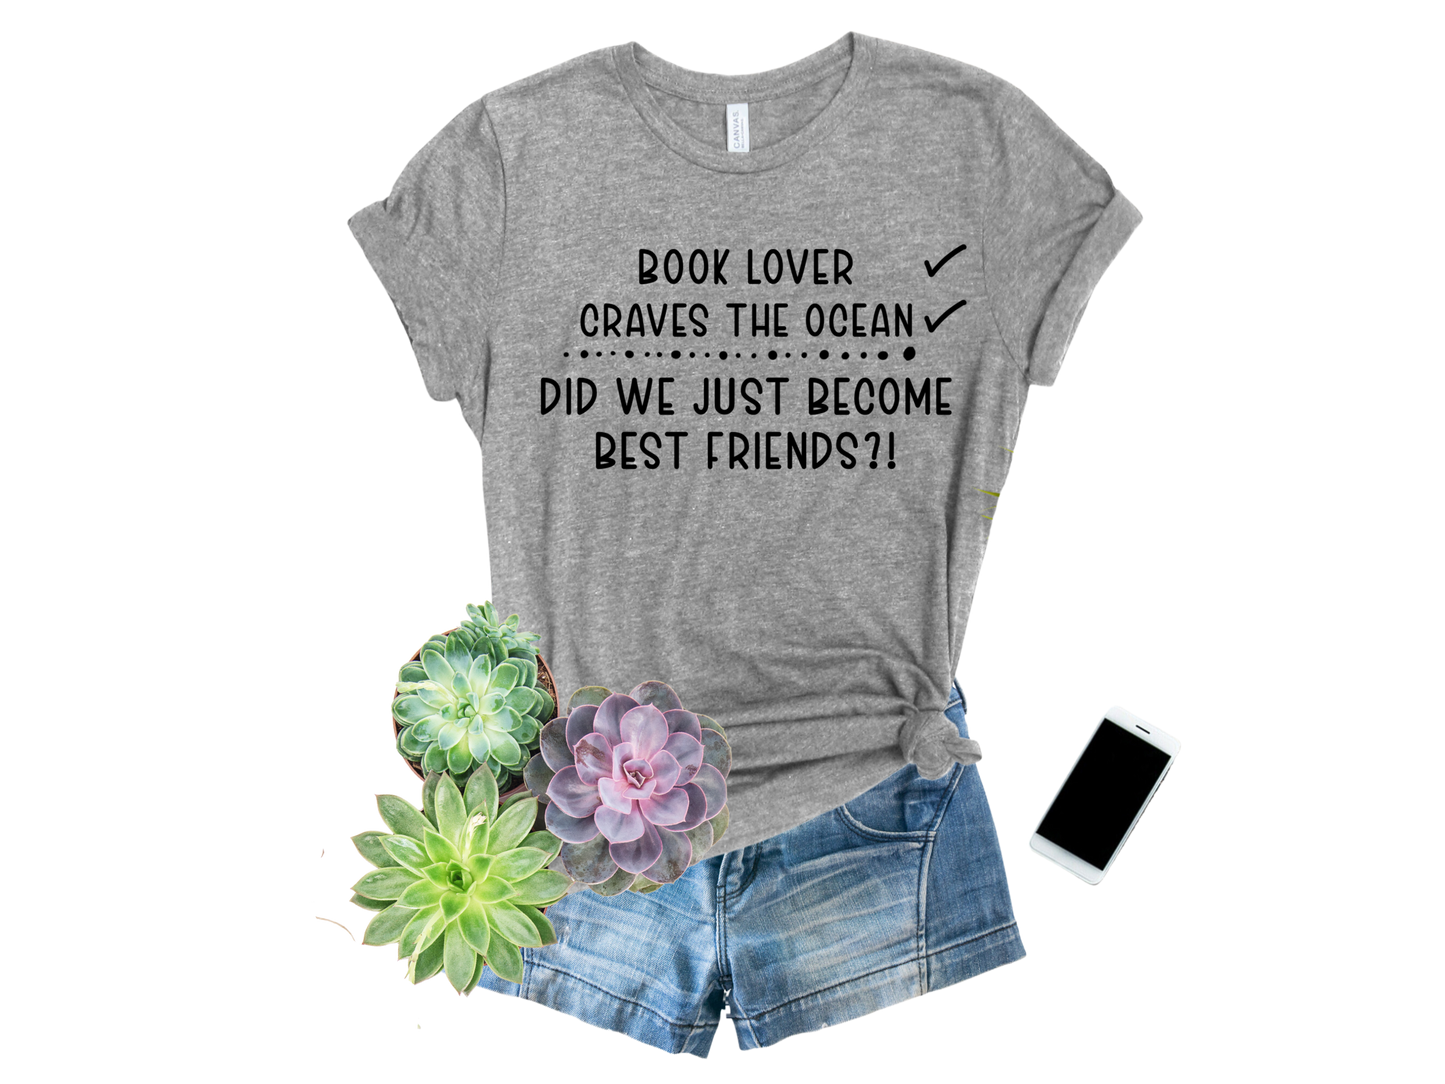 Book Lover & Craves the Ocean, Did We Just Become BFFs?